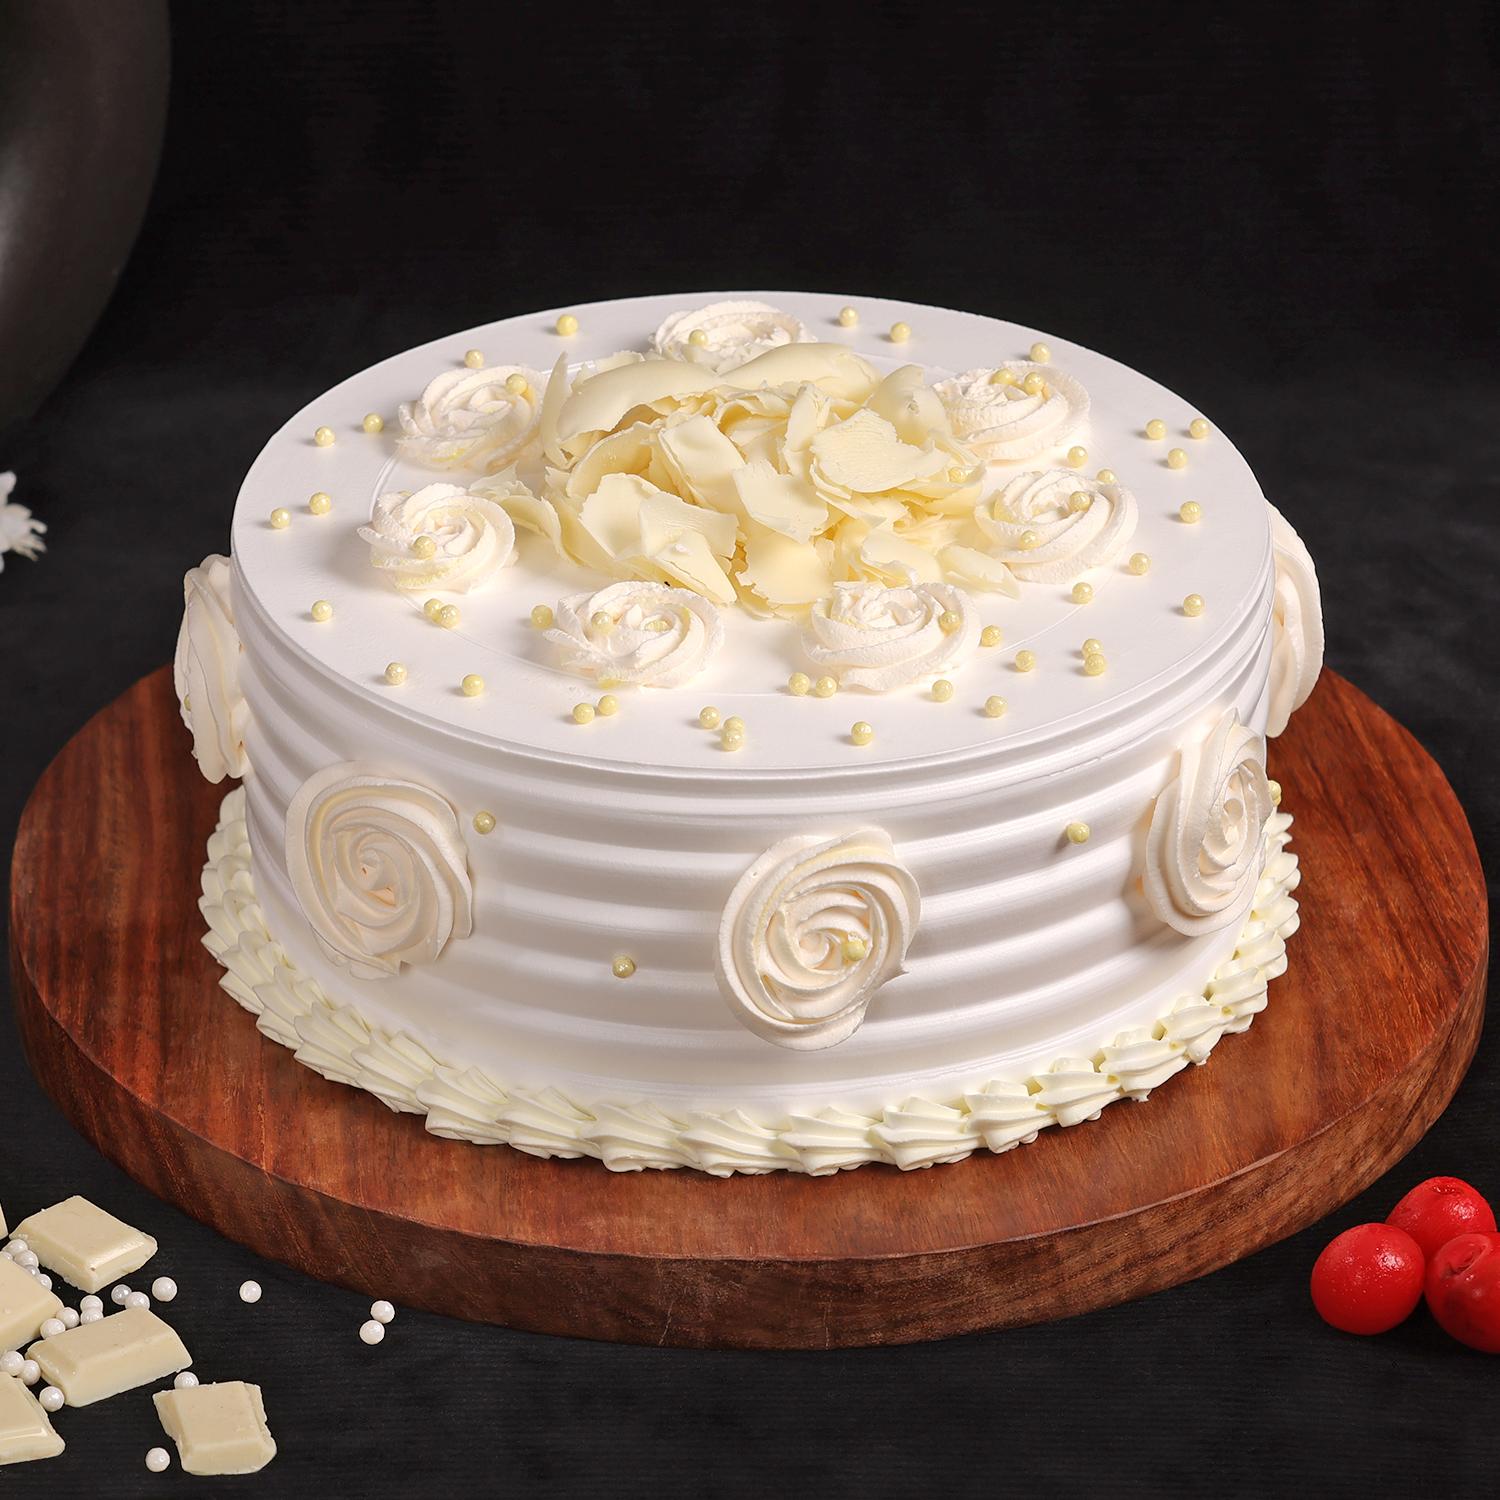 Atul Bakery in Pal Bhatha,Surat - Best Cake Shops in Surat - Justdial